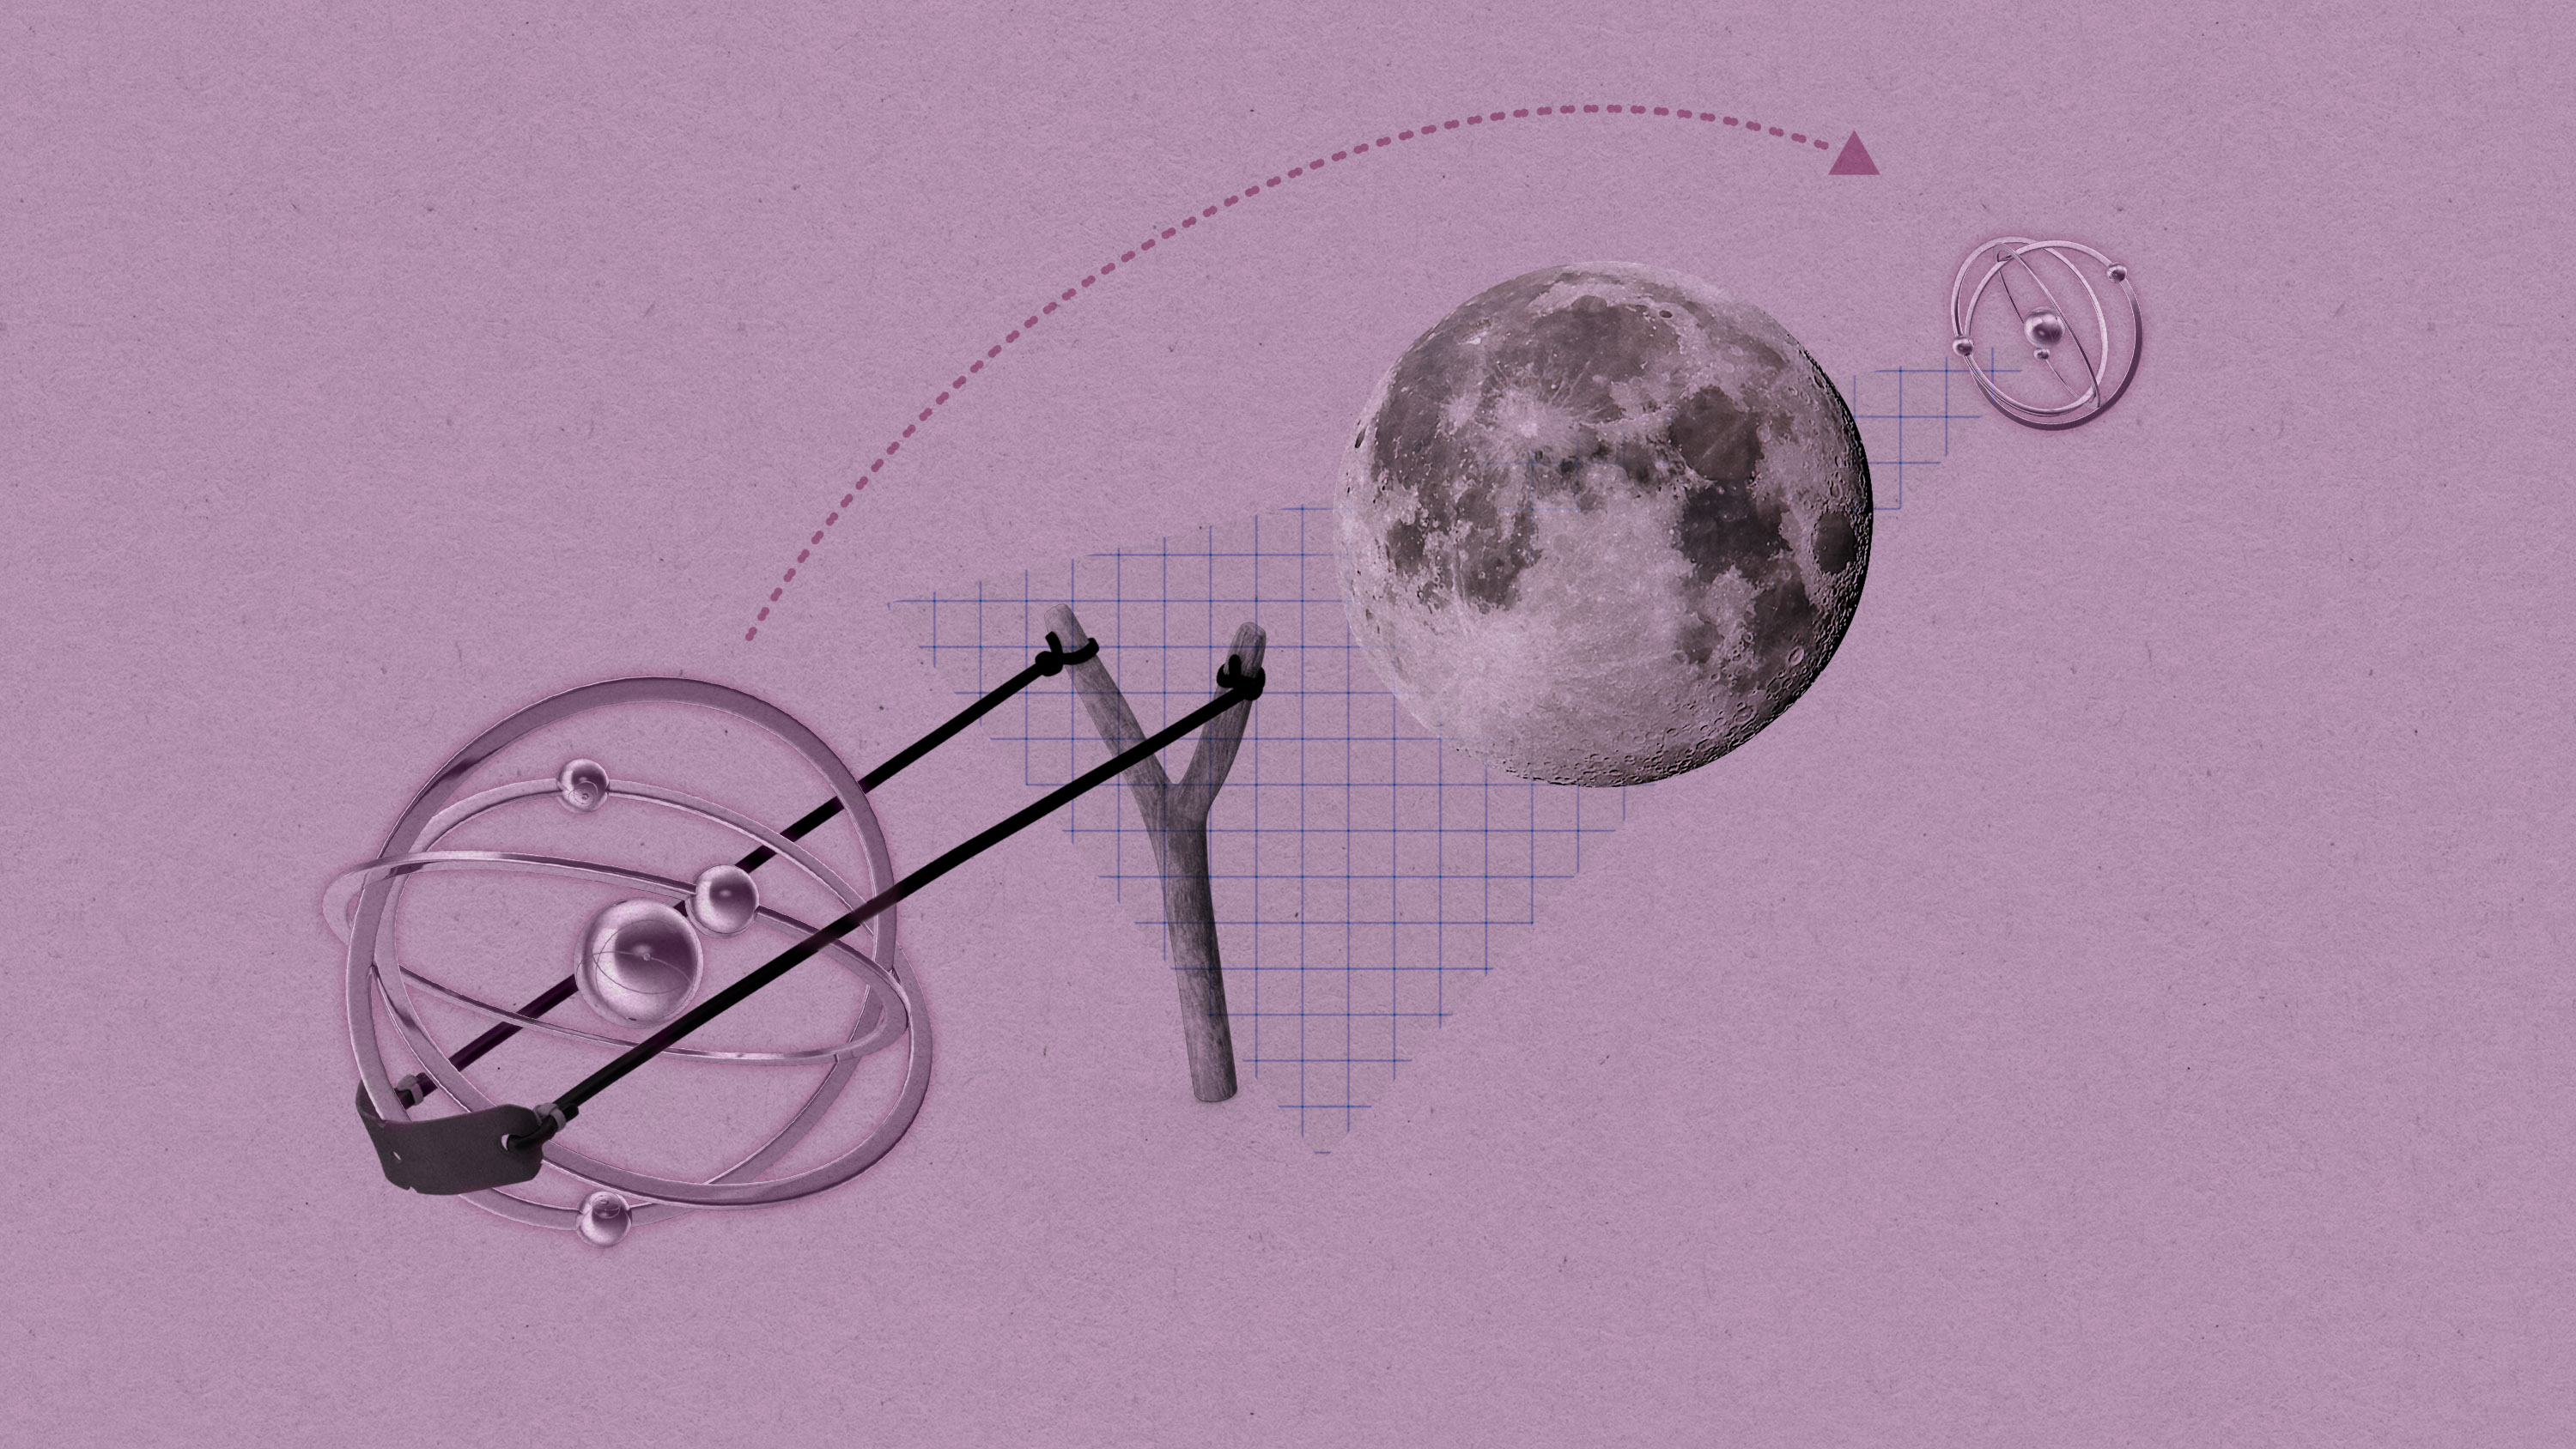 an atomic model in a slingshot aimed past the moon to hit another atomic model on the far side